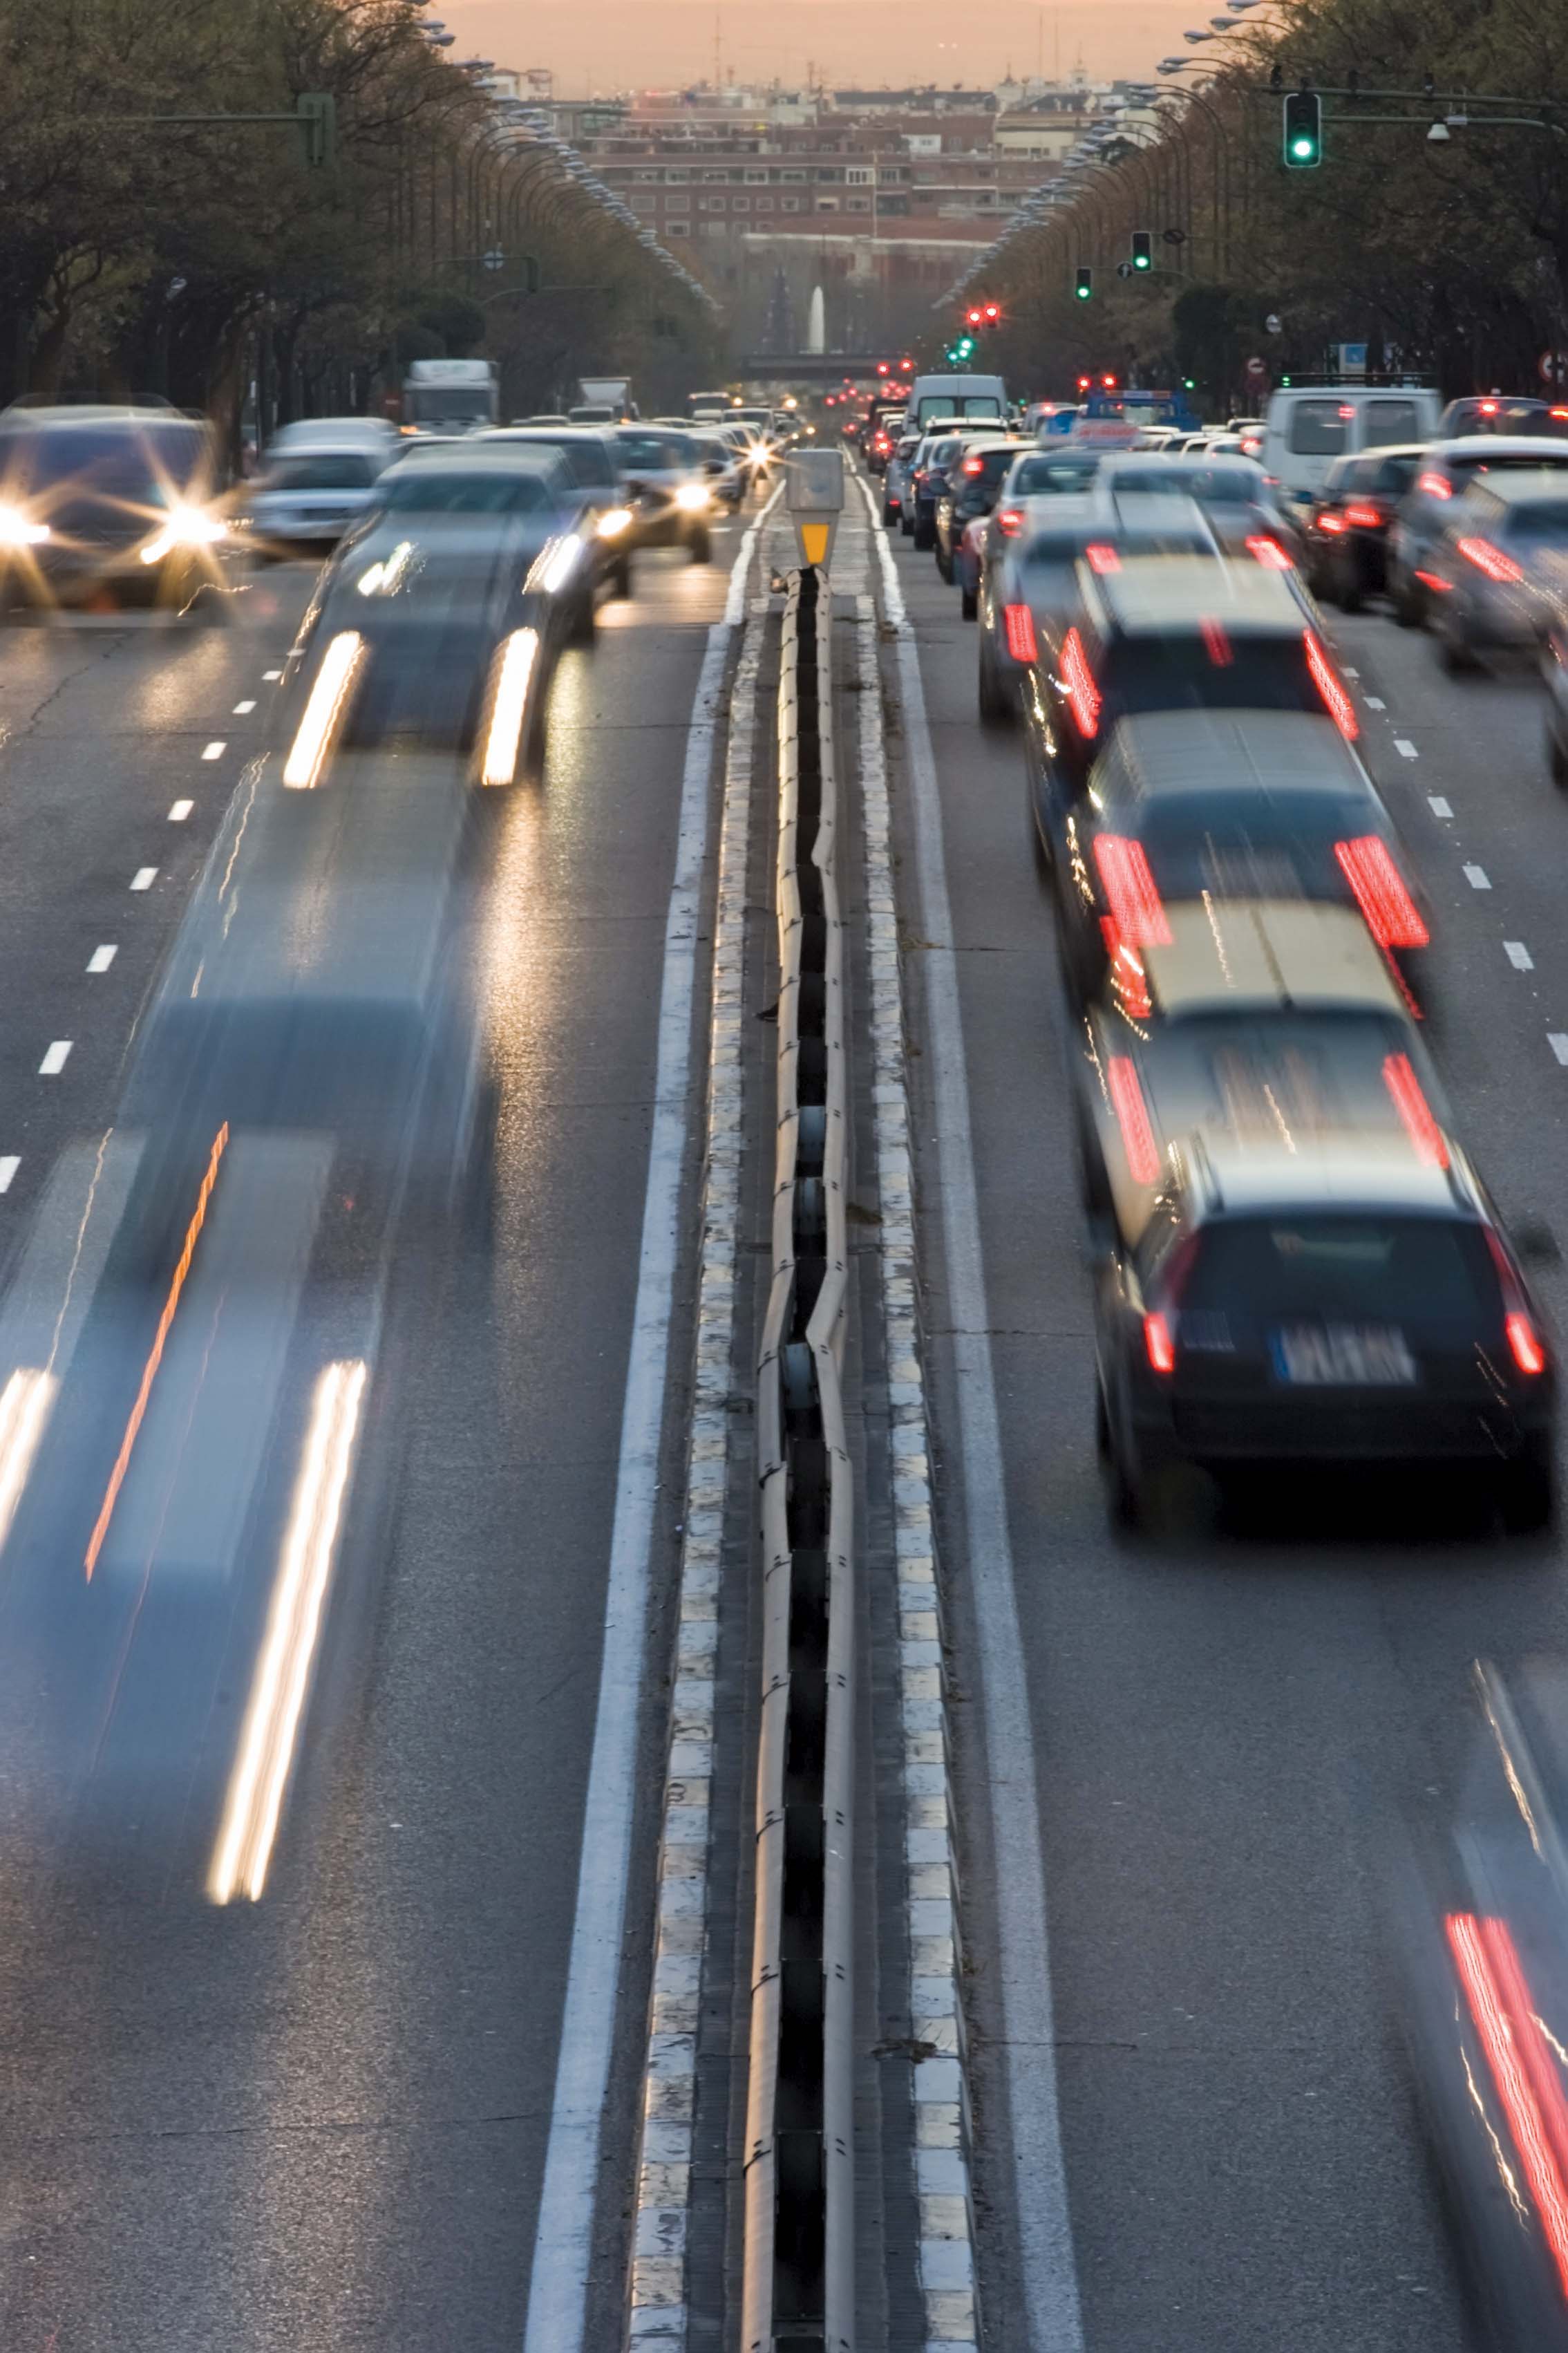 Road pricing would reduce the traffic volume on the M40 